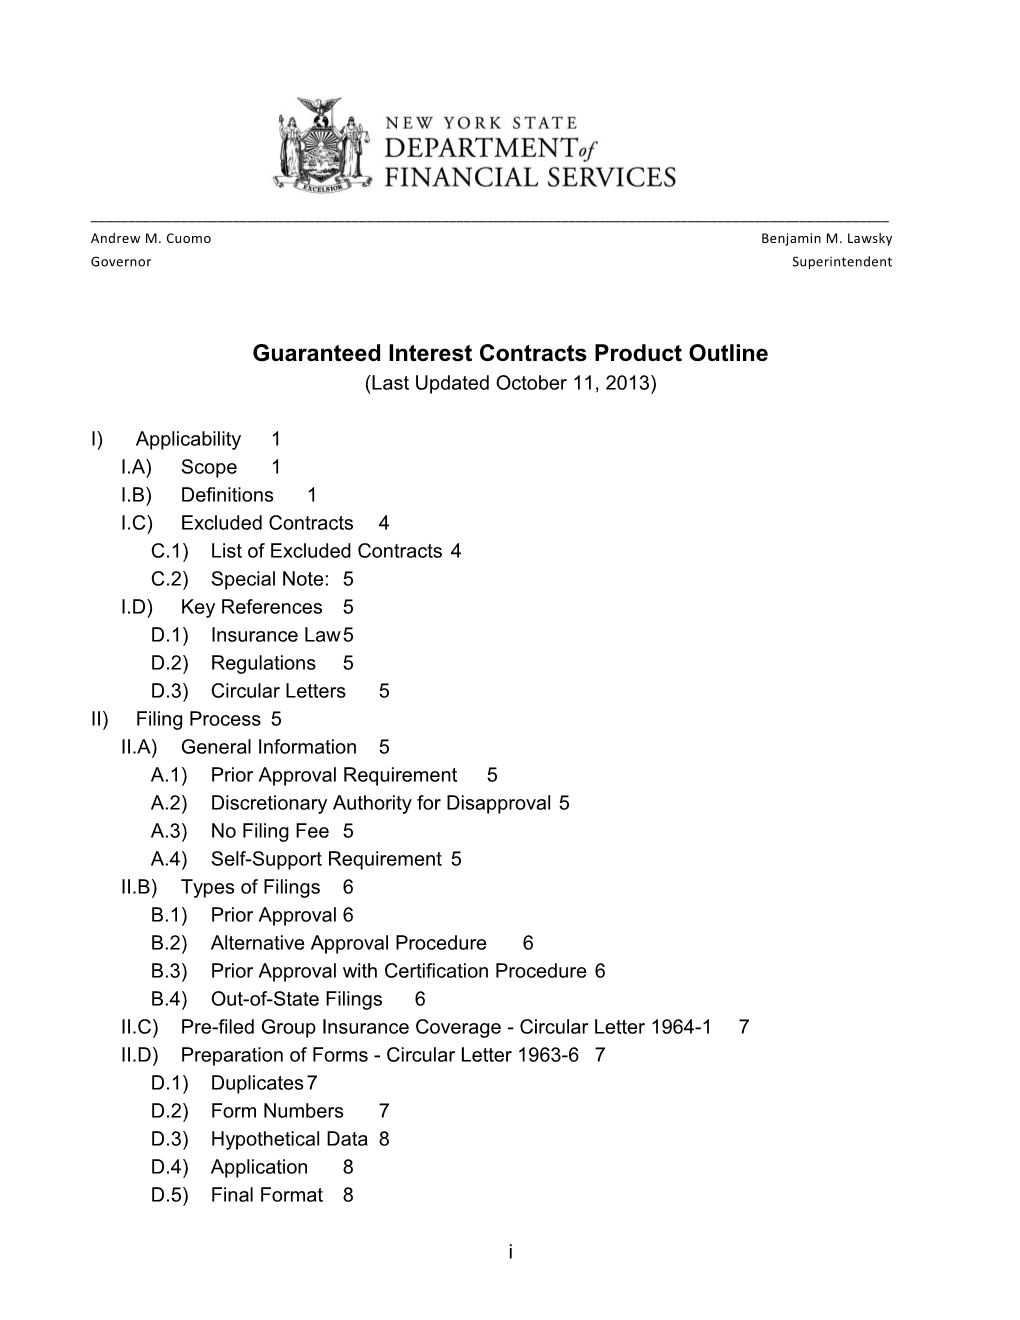 Guaranteed Interest Contracts Product Outline 2013